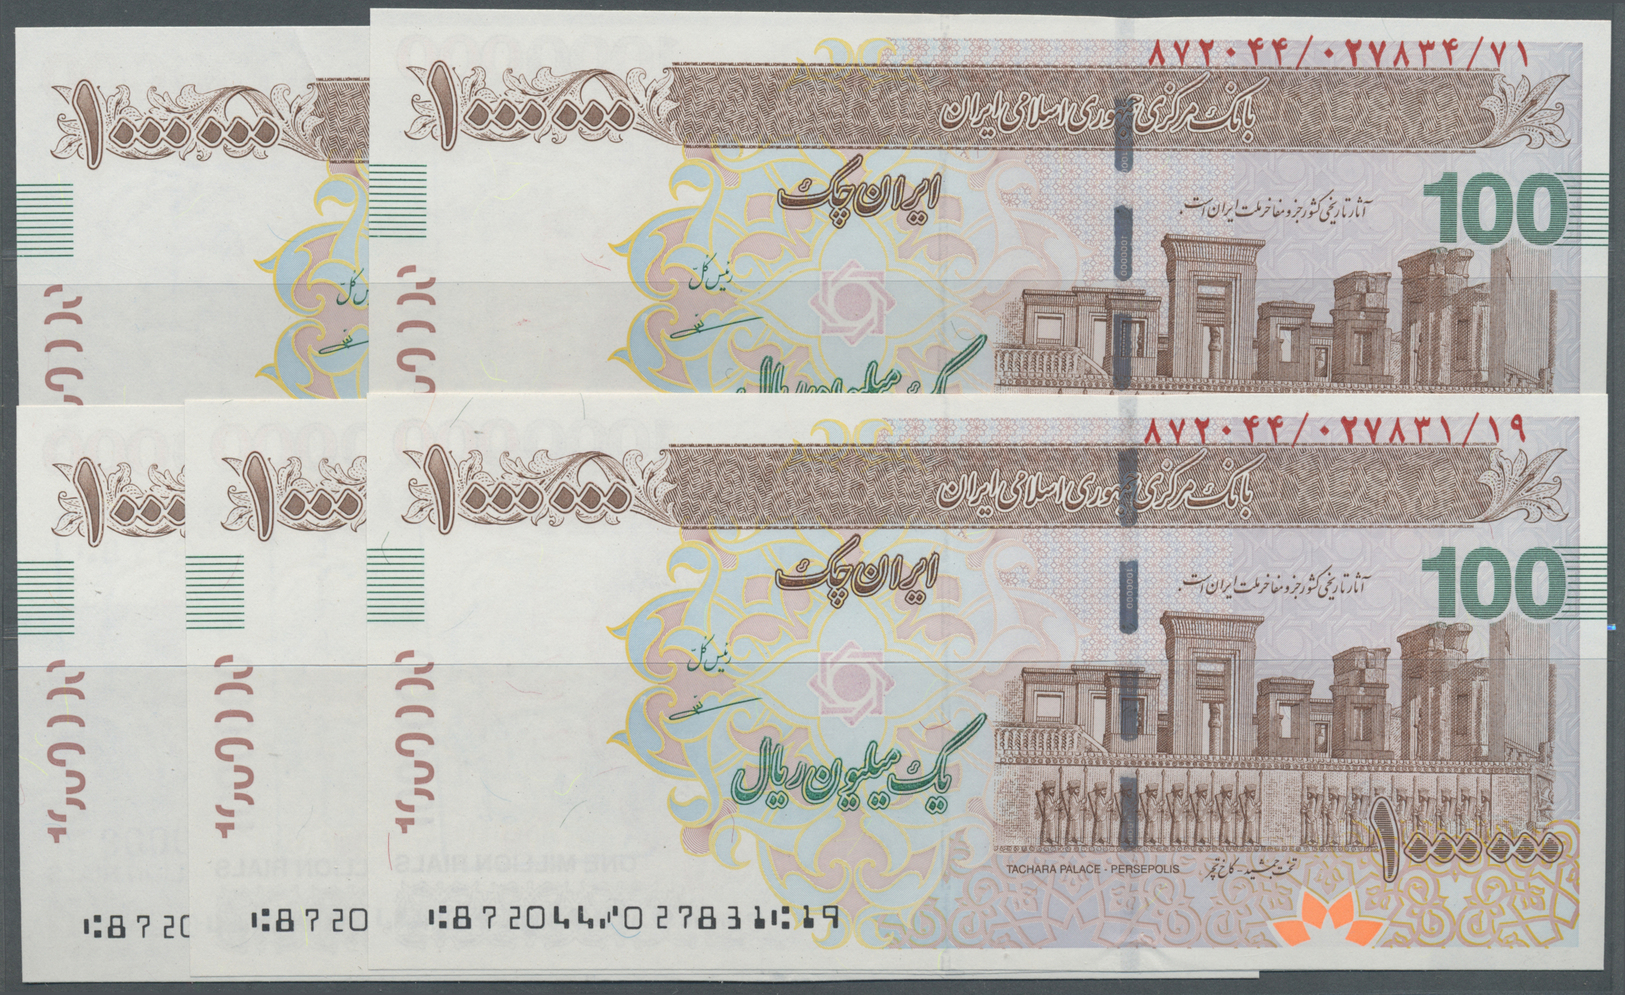 01218 Iran: Set Of 5 Bank Cheques 1.000.000 Rials ND P. NL, All Bank Stamped On Back But All In Condition: UNC. (5 Pcs) - Iran